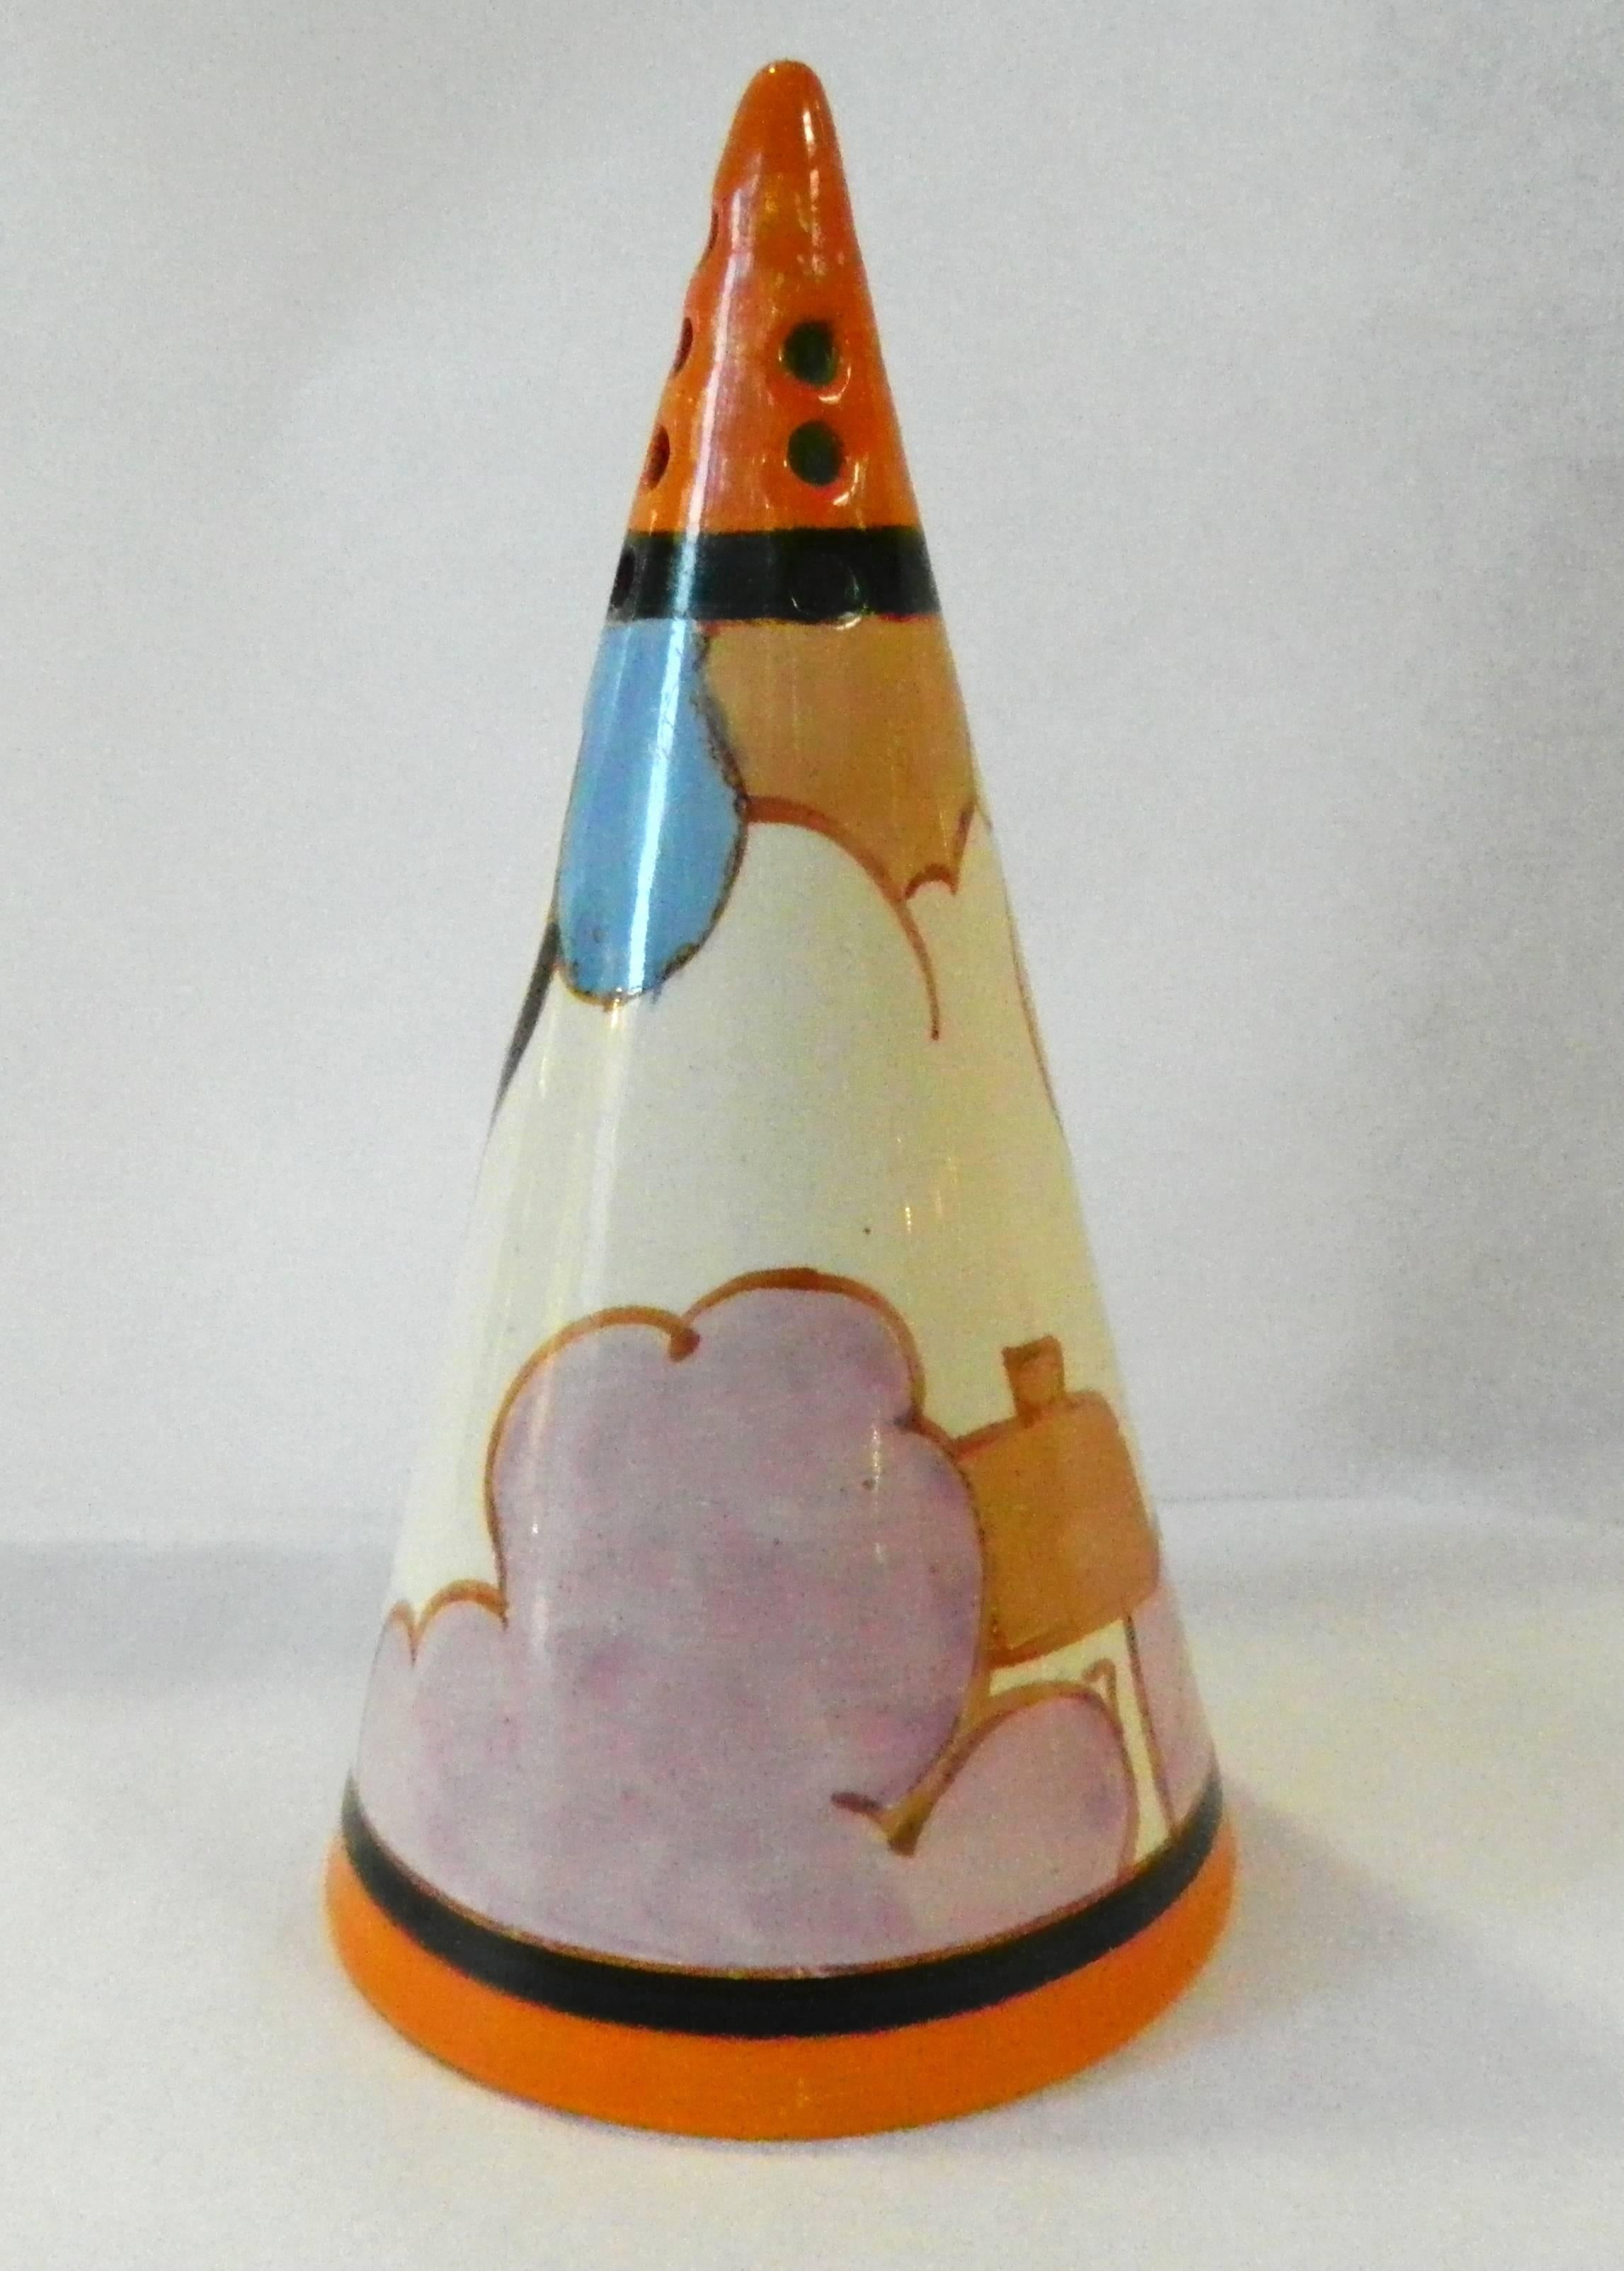 Original Clarice Cliff Fantasque orange conical sifter or shaker with a cottage under a group of colorful trees. It was done in the 1930s.